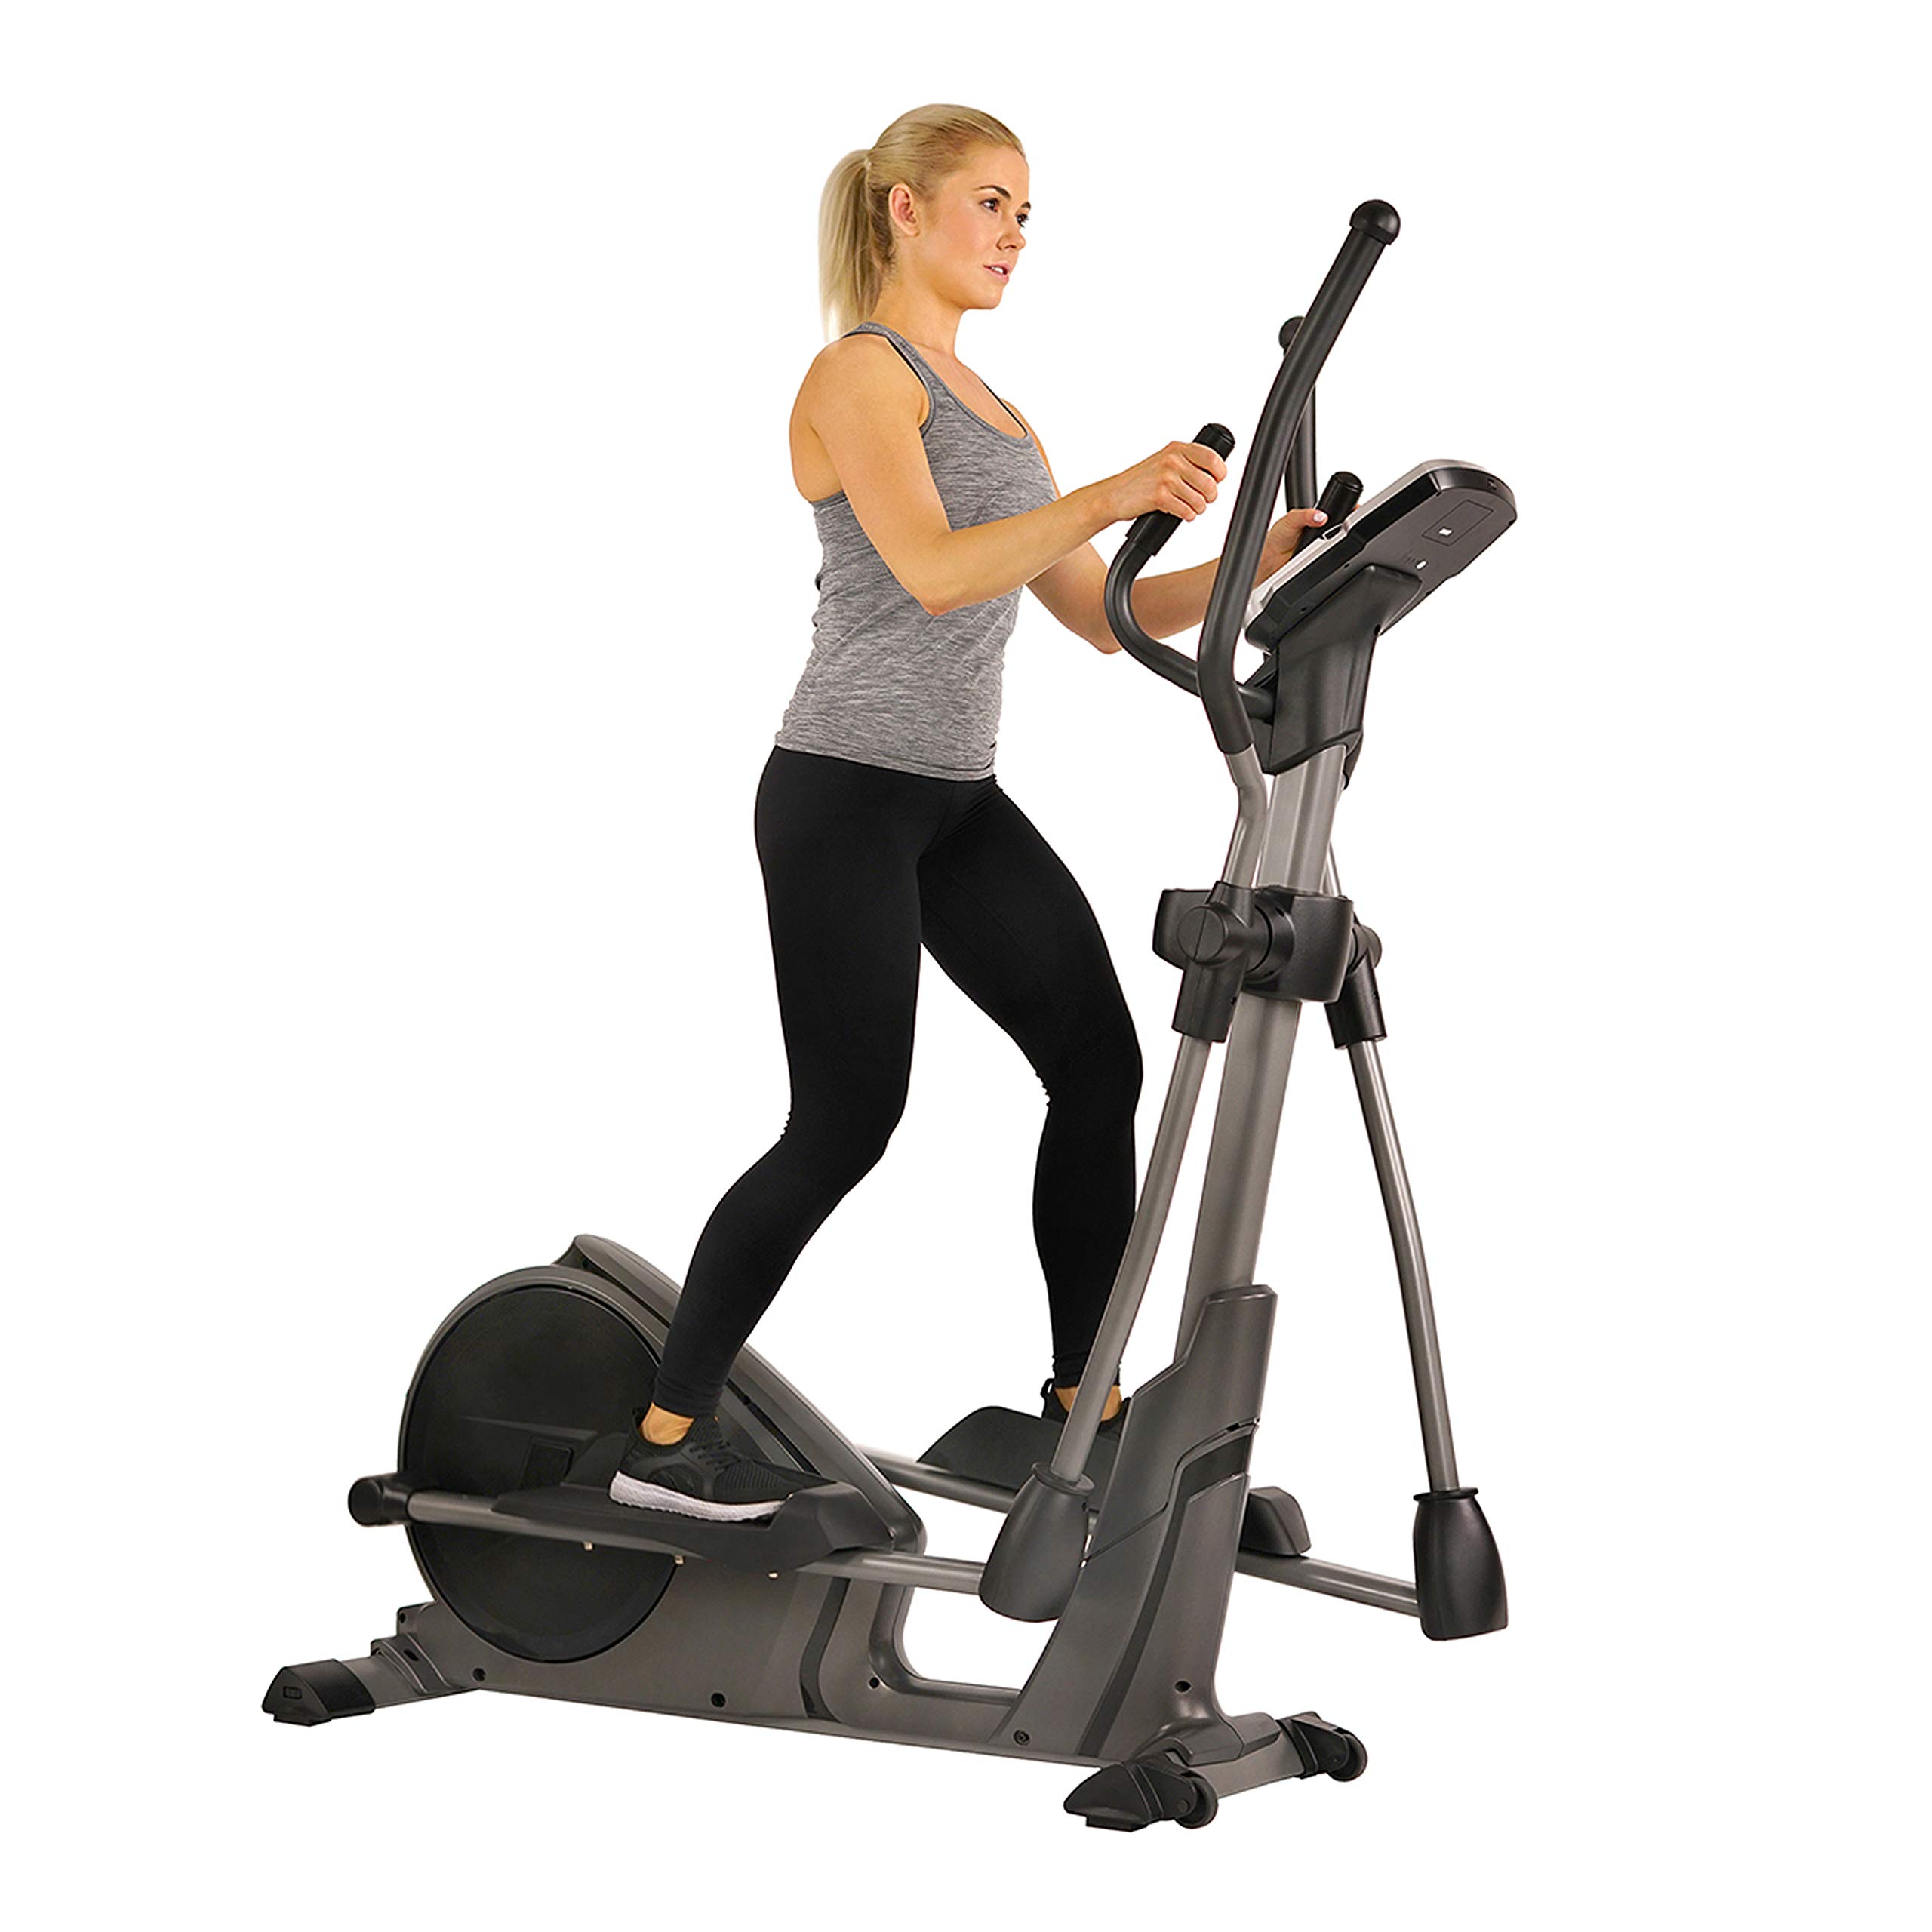 Elliptical Trainer Machine Programmable Monitor and Heart Rate Monitoring